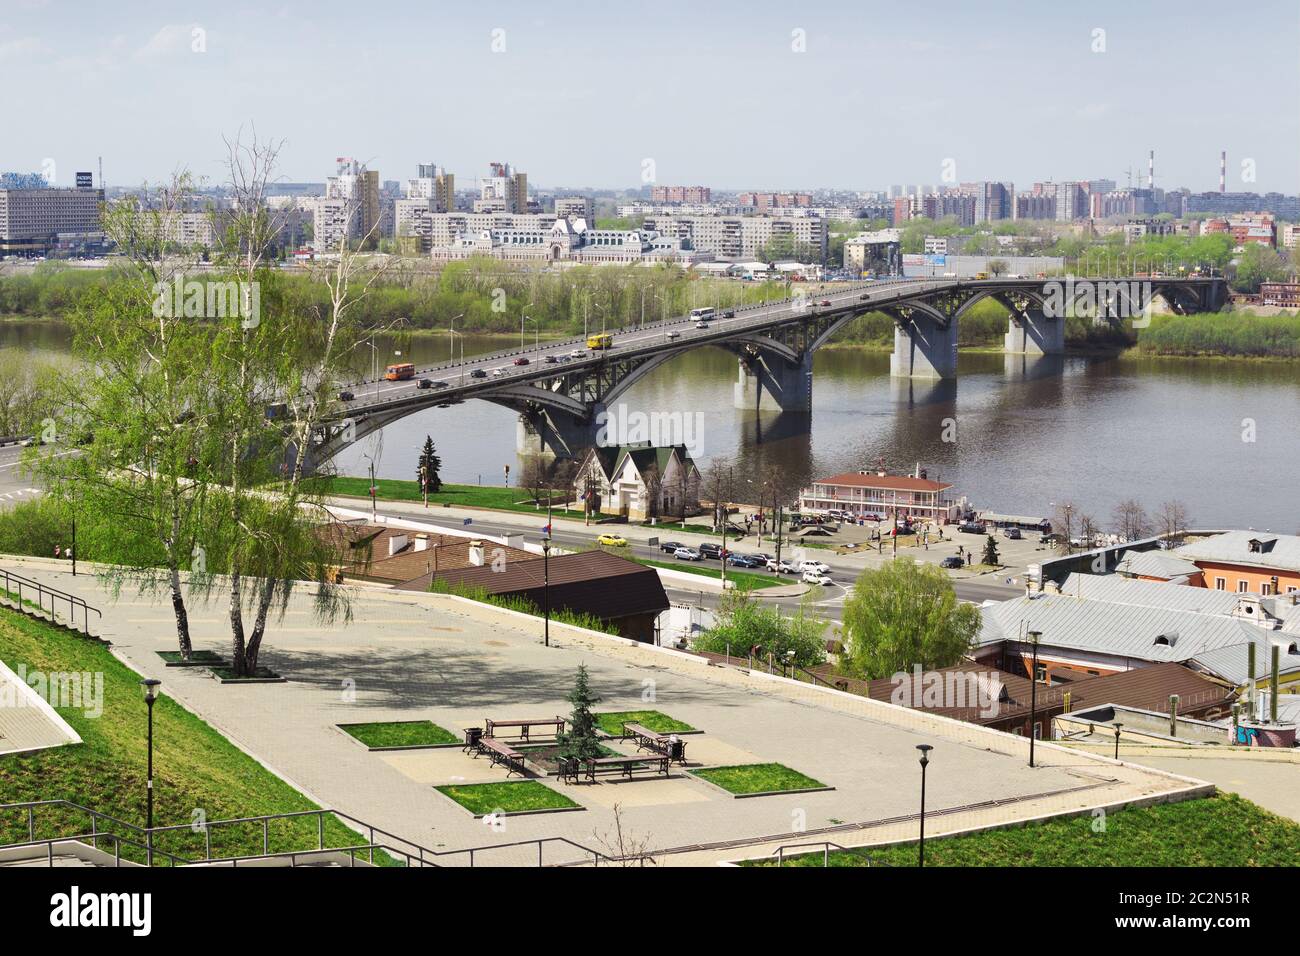 Nizhny Novgorod, Russia - May 1, 2014: The oldest bridge in the city. Built in the thirties over the river Oka, Russia Stock Photo